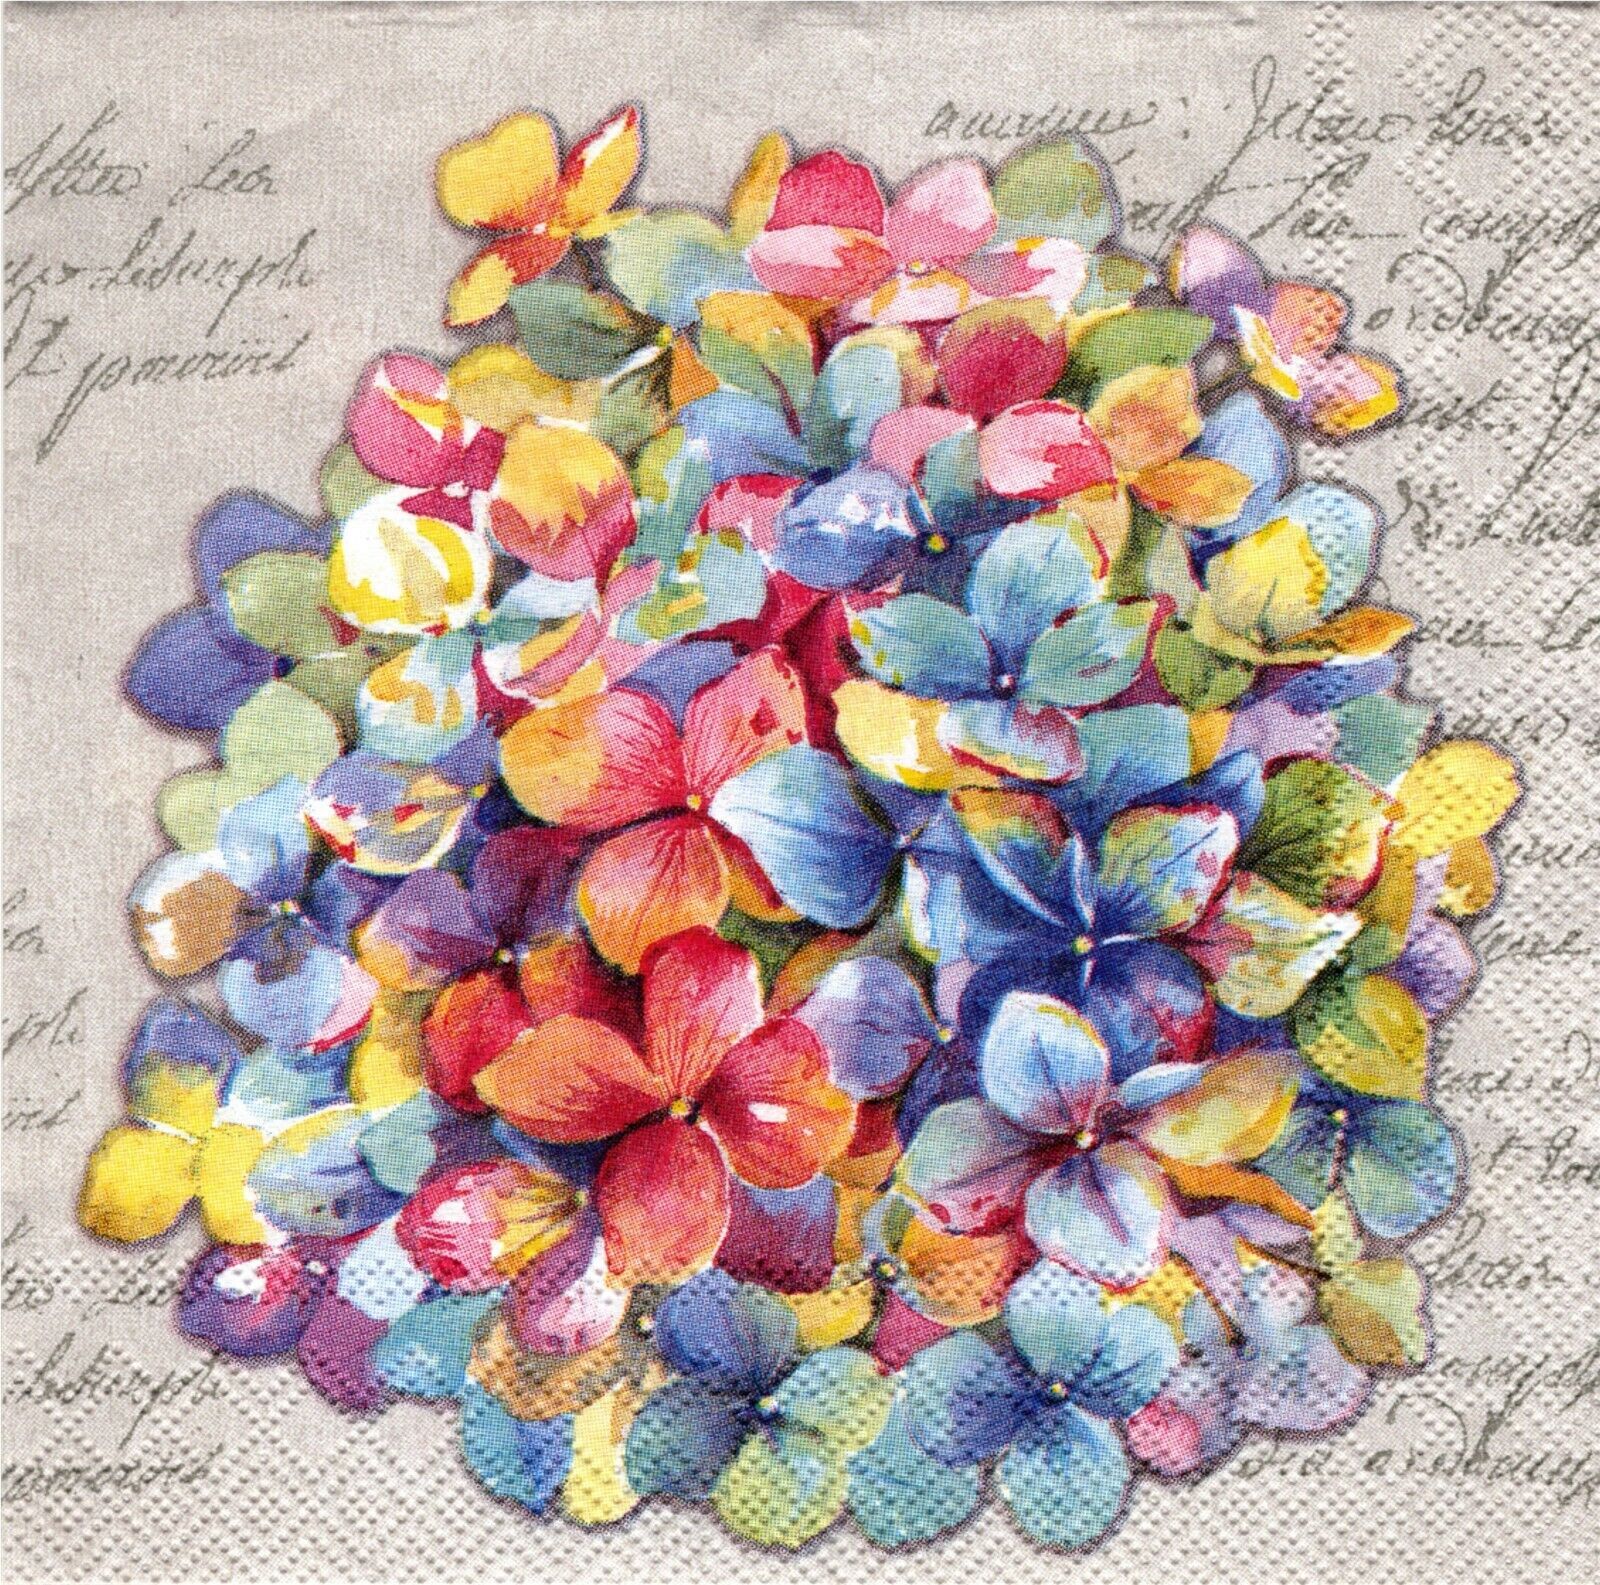 (2) Paper Beverage Napkins for Decoupage/Mixed Media - Pricey Linen Hydrangeas